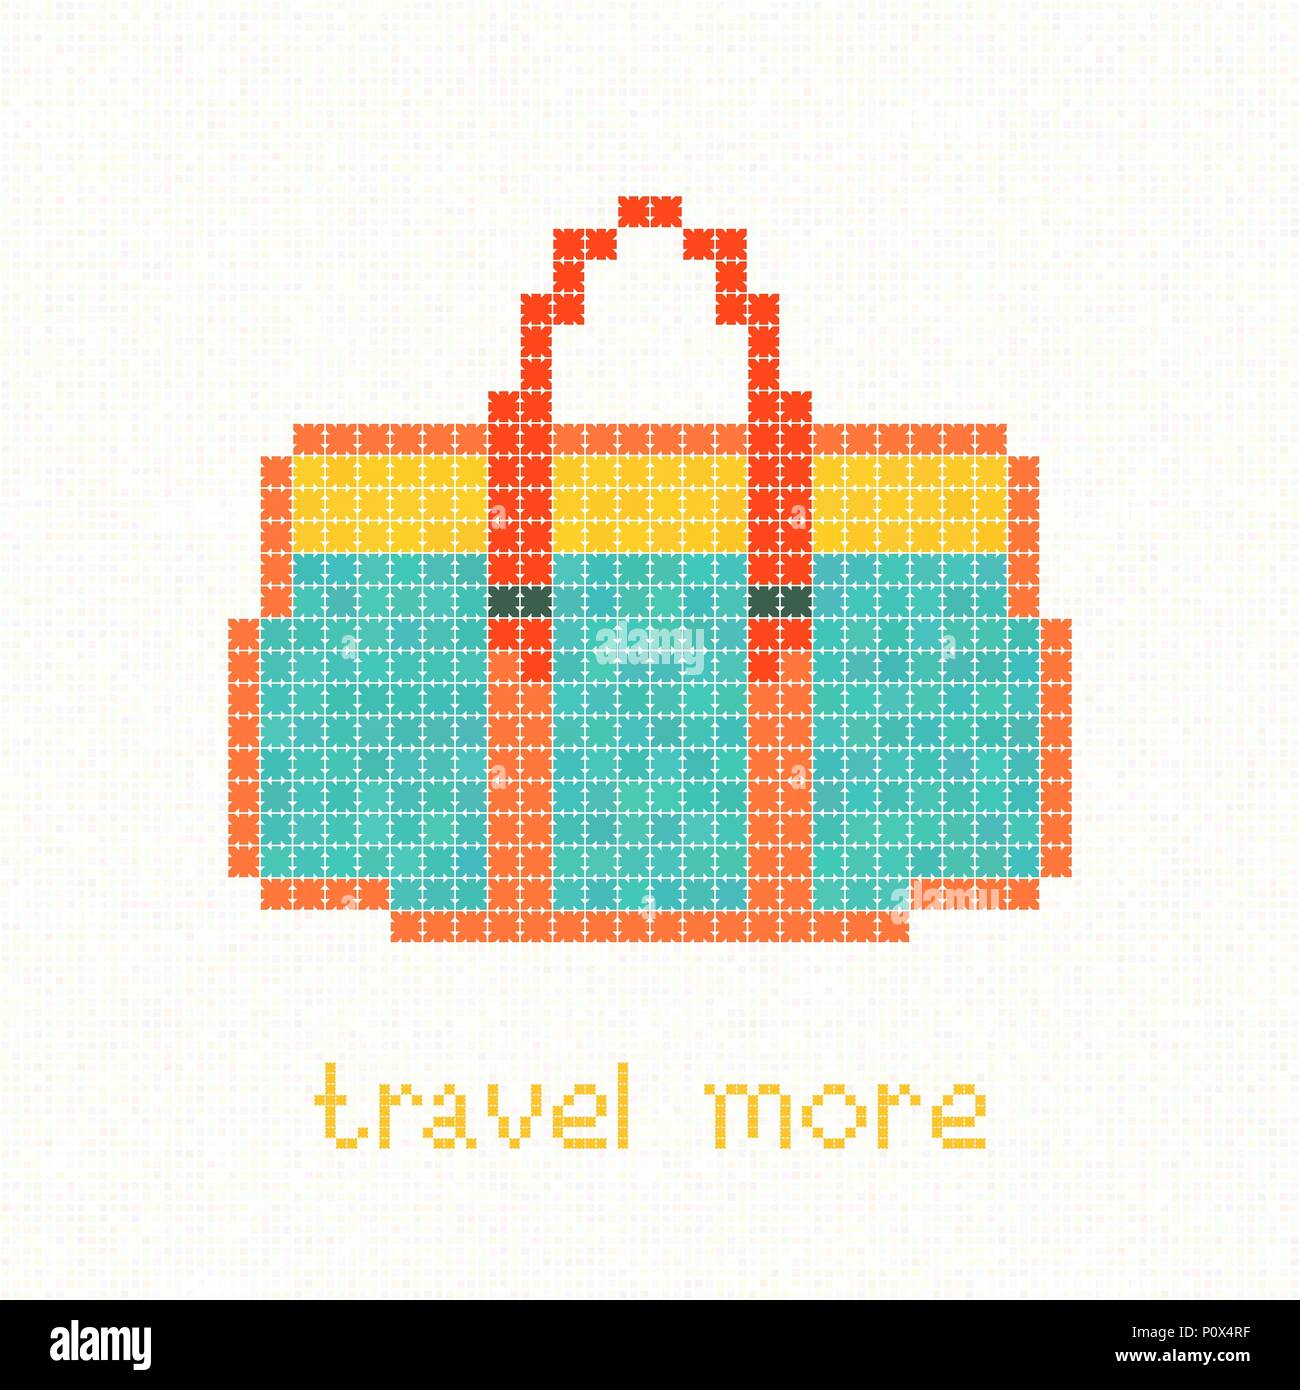 Travel more! Pixel art postcard. Green bag with orange straps and yellow top. Trendy hipster Handbag. Woman casual purse. Bright colored travel bag. Stock Vector